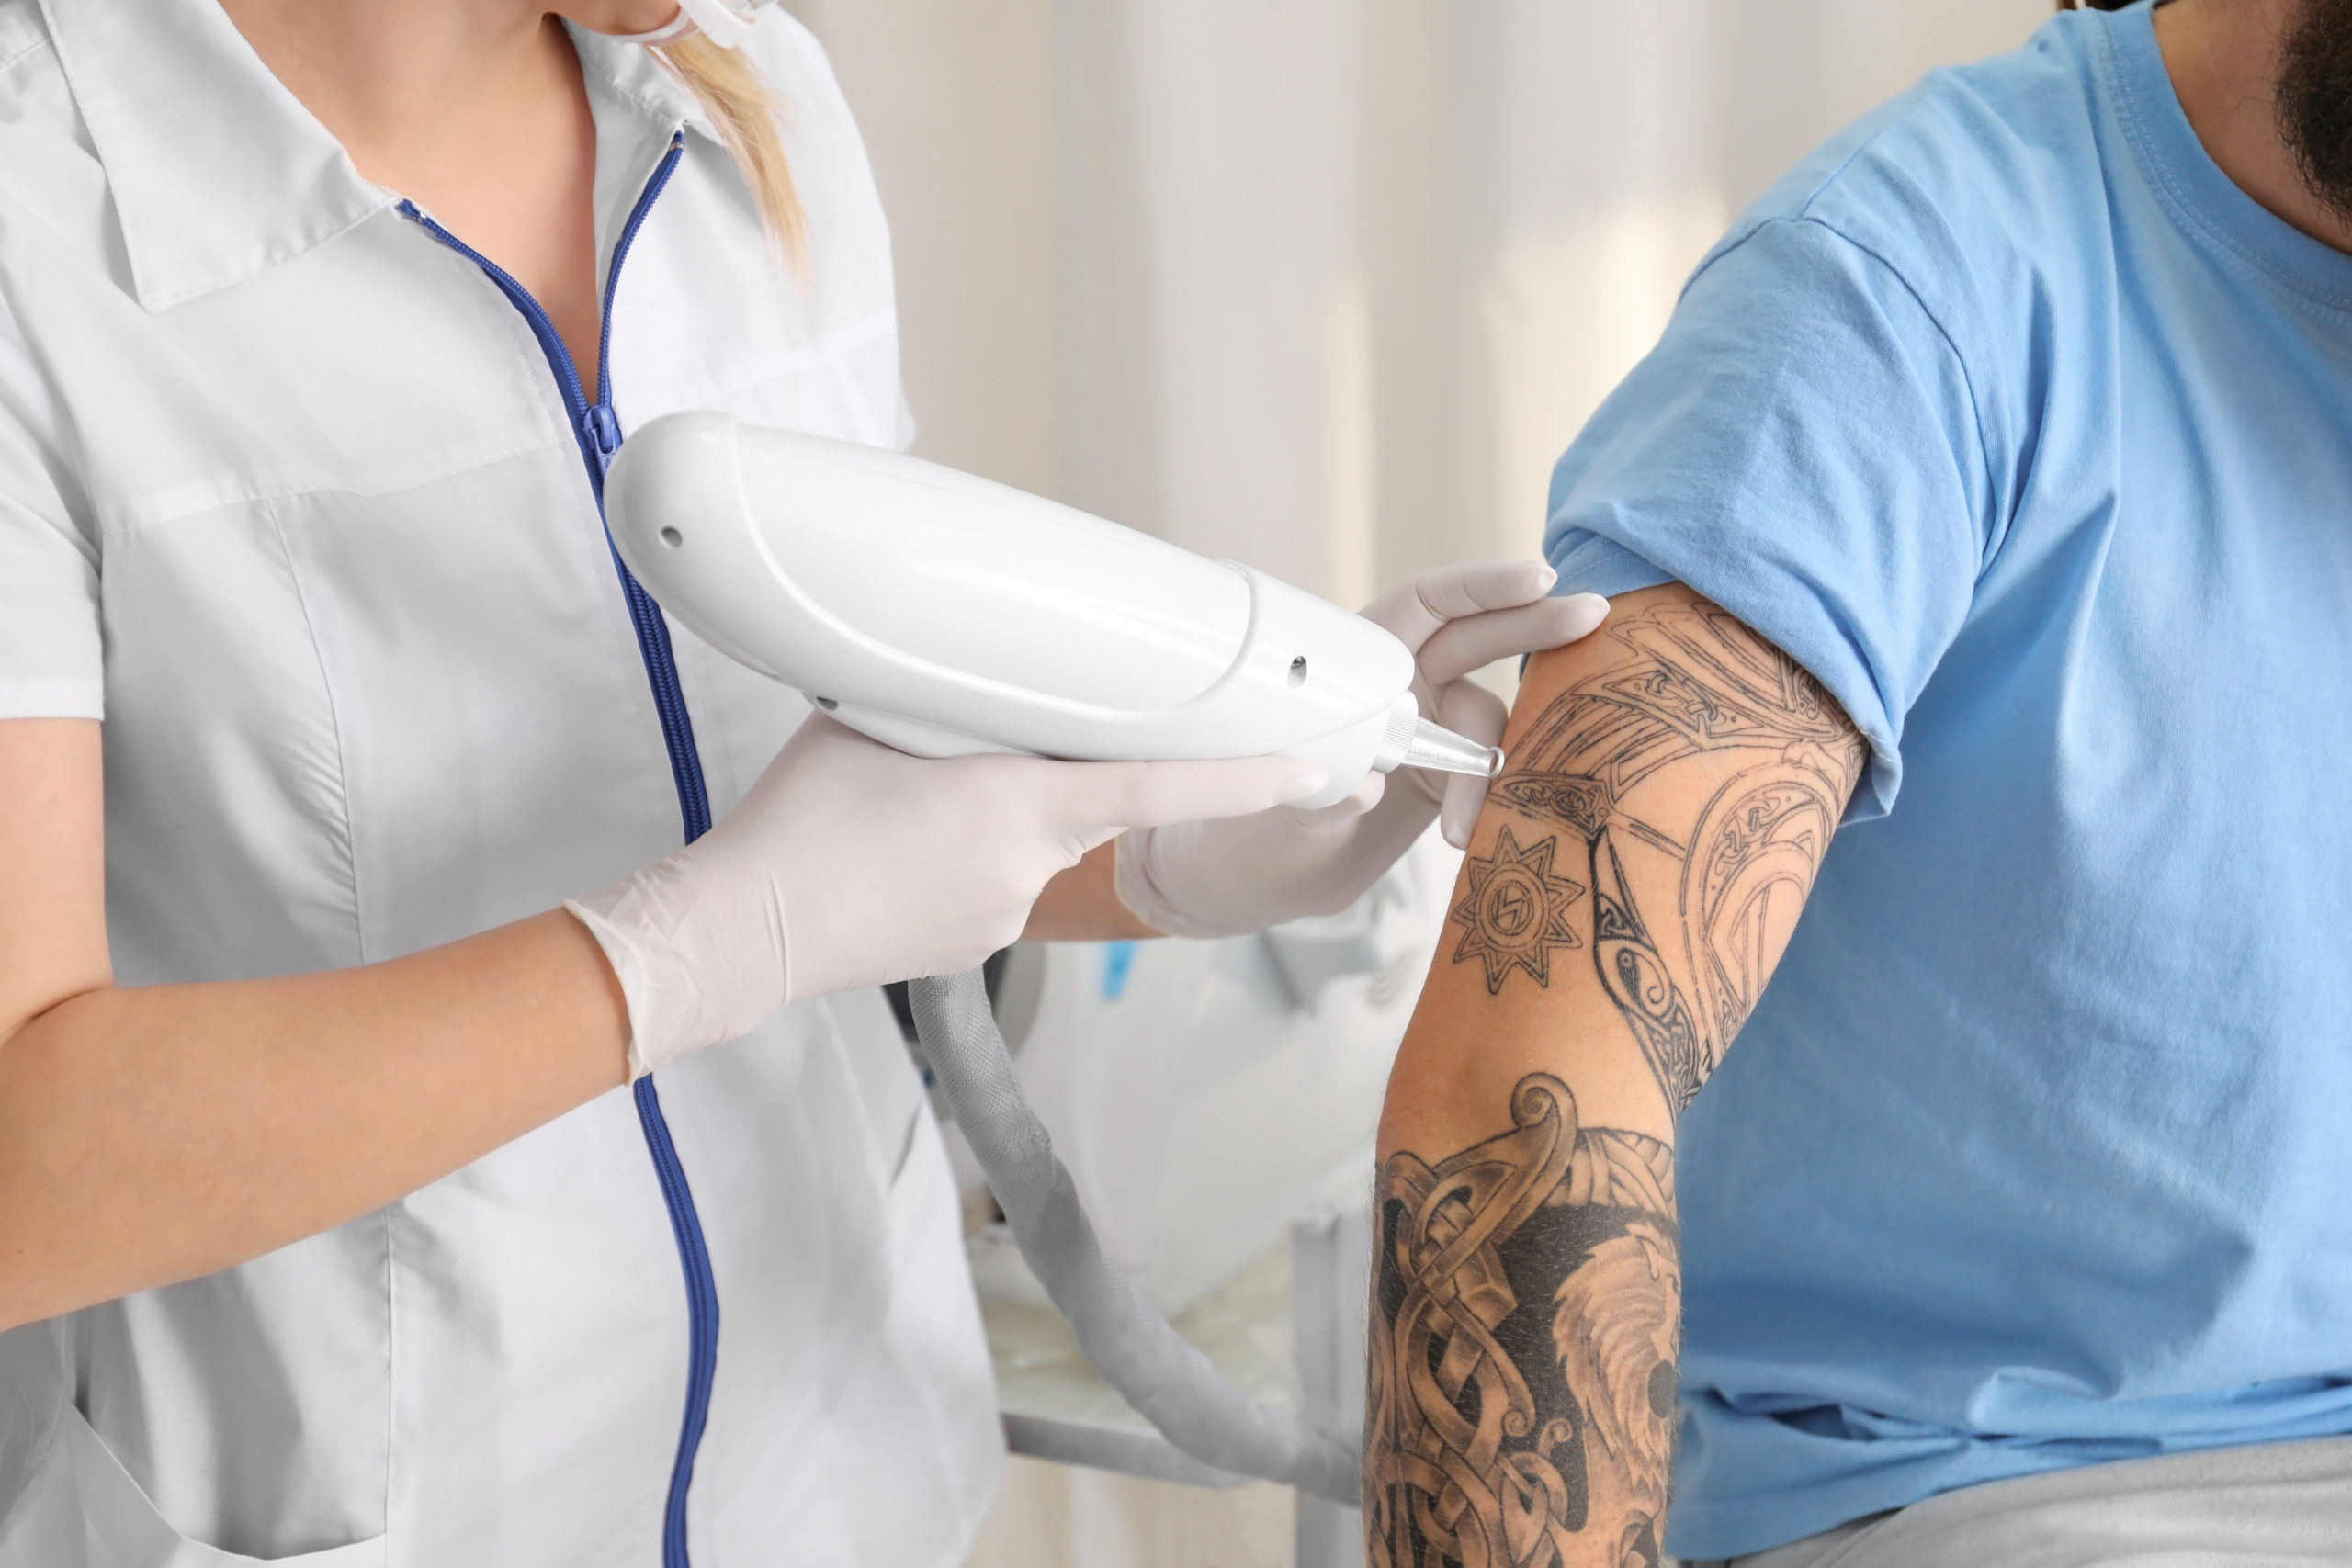 Tattoo Removal (non-laser) | Proskin Clinic | Adelaide CBD & Country SA